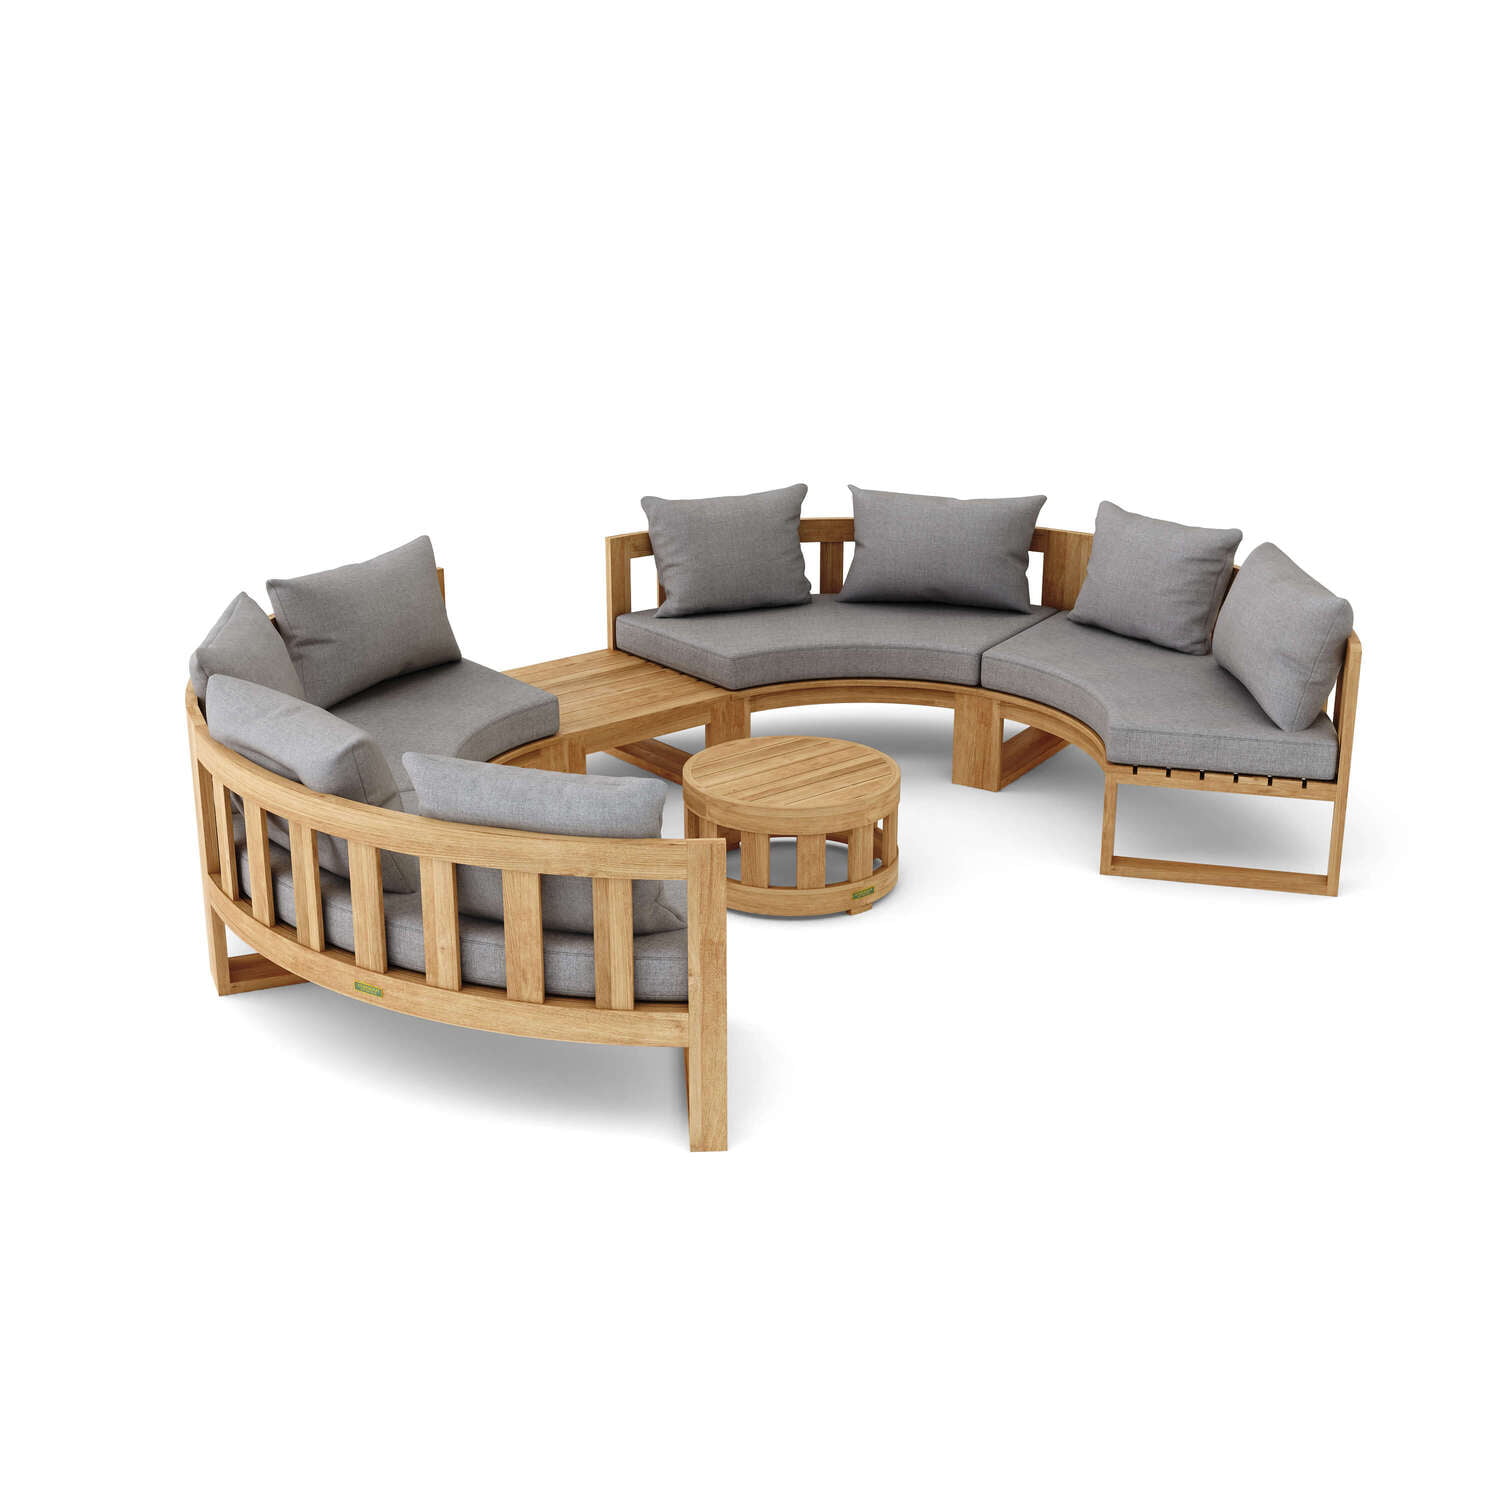 Picture of Anderson Teak SET-811 Circular Modular Deep Seating Set, Natural Smooth Well Sanded